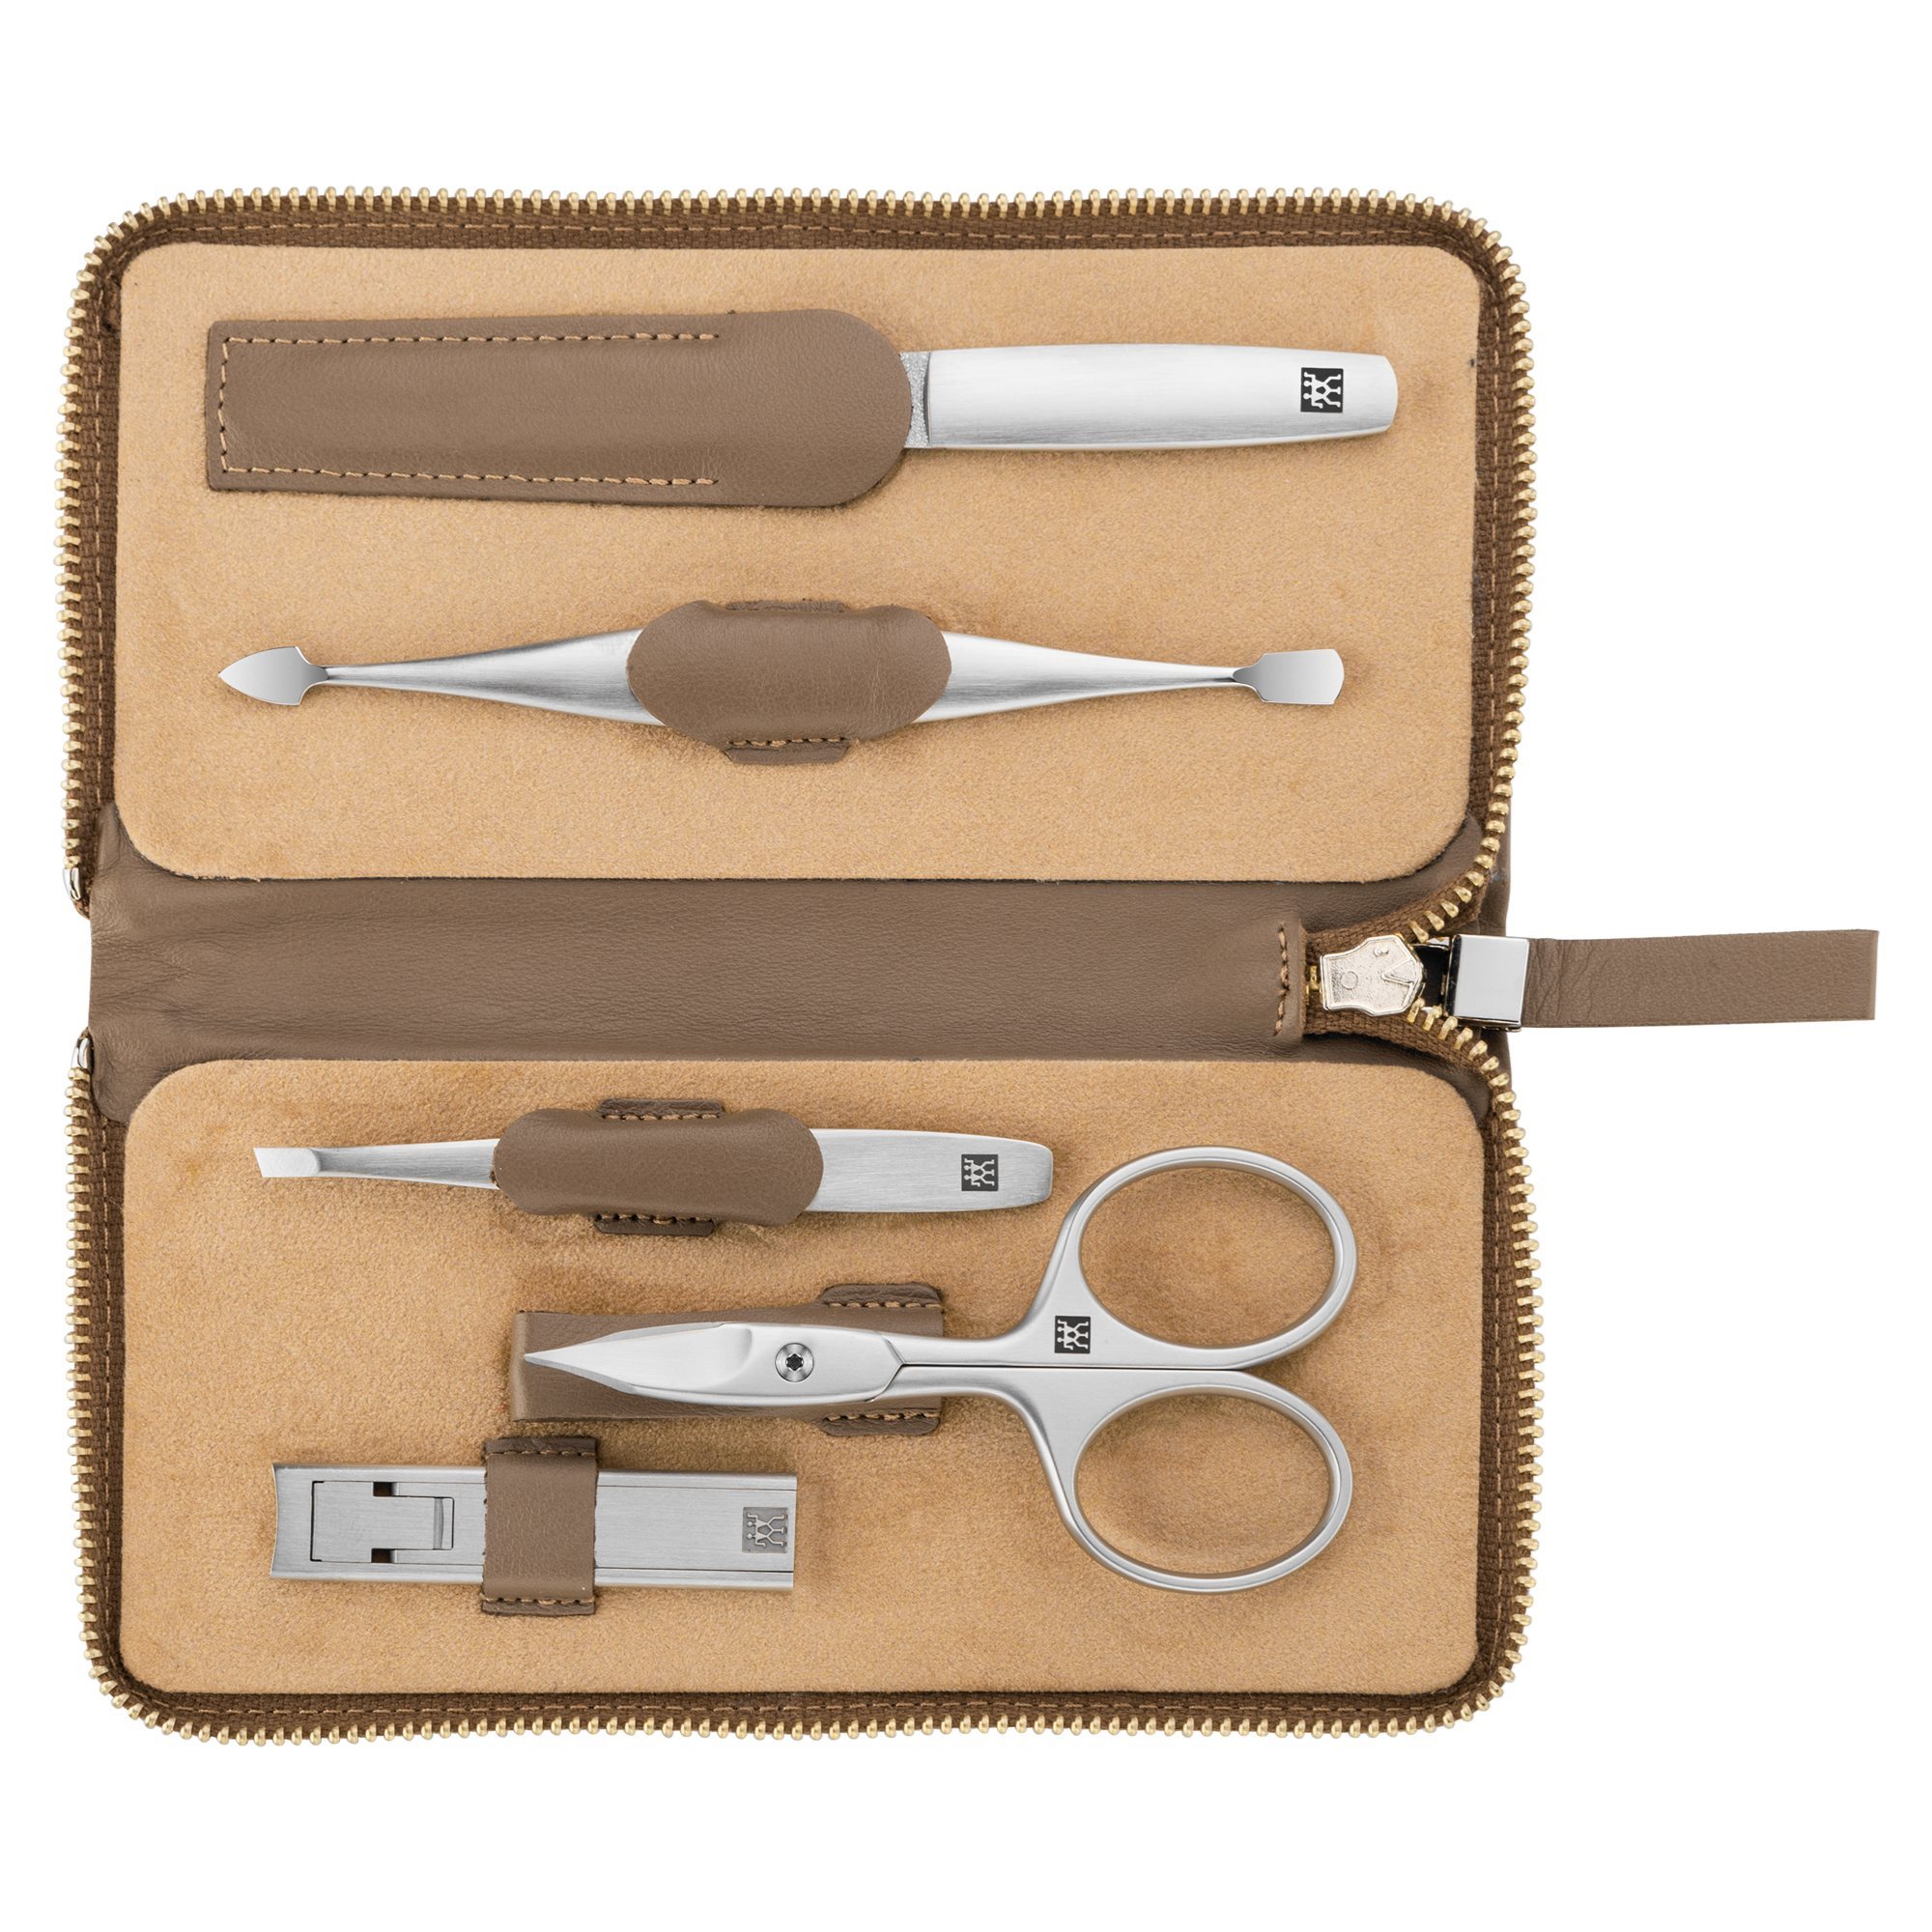 5-piece manicure set, nickel-plated steel, brown leather case - Zwilling  Twinox | KitchenShop